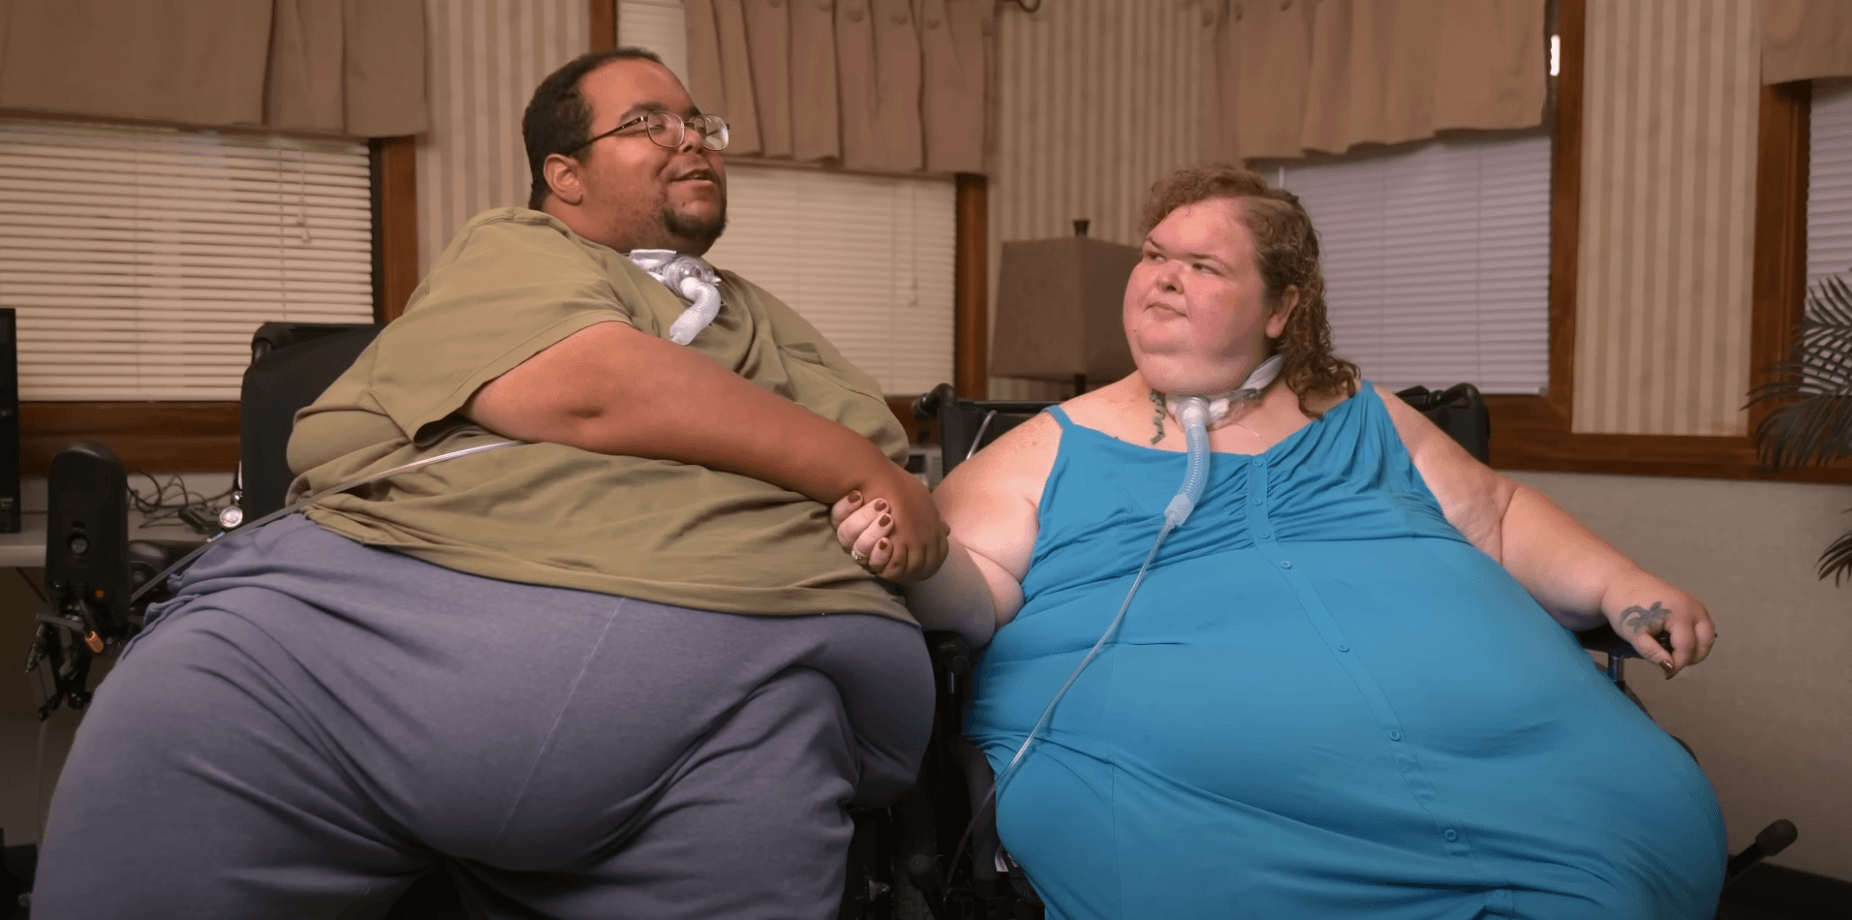 '1000-Lb. Sisters' stars Caleb Willingham and Tammy Slaton sitting next to each other and shaking hands